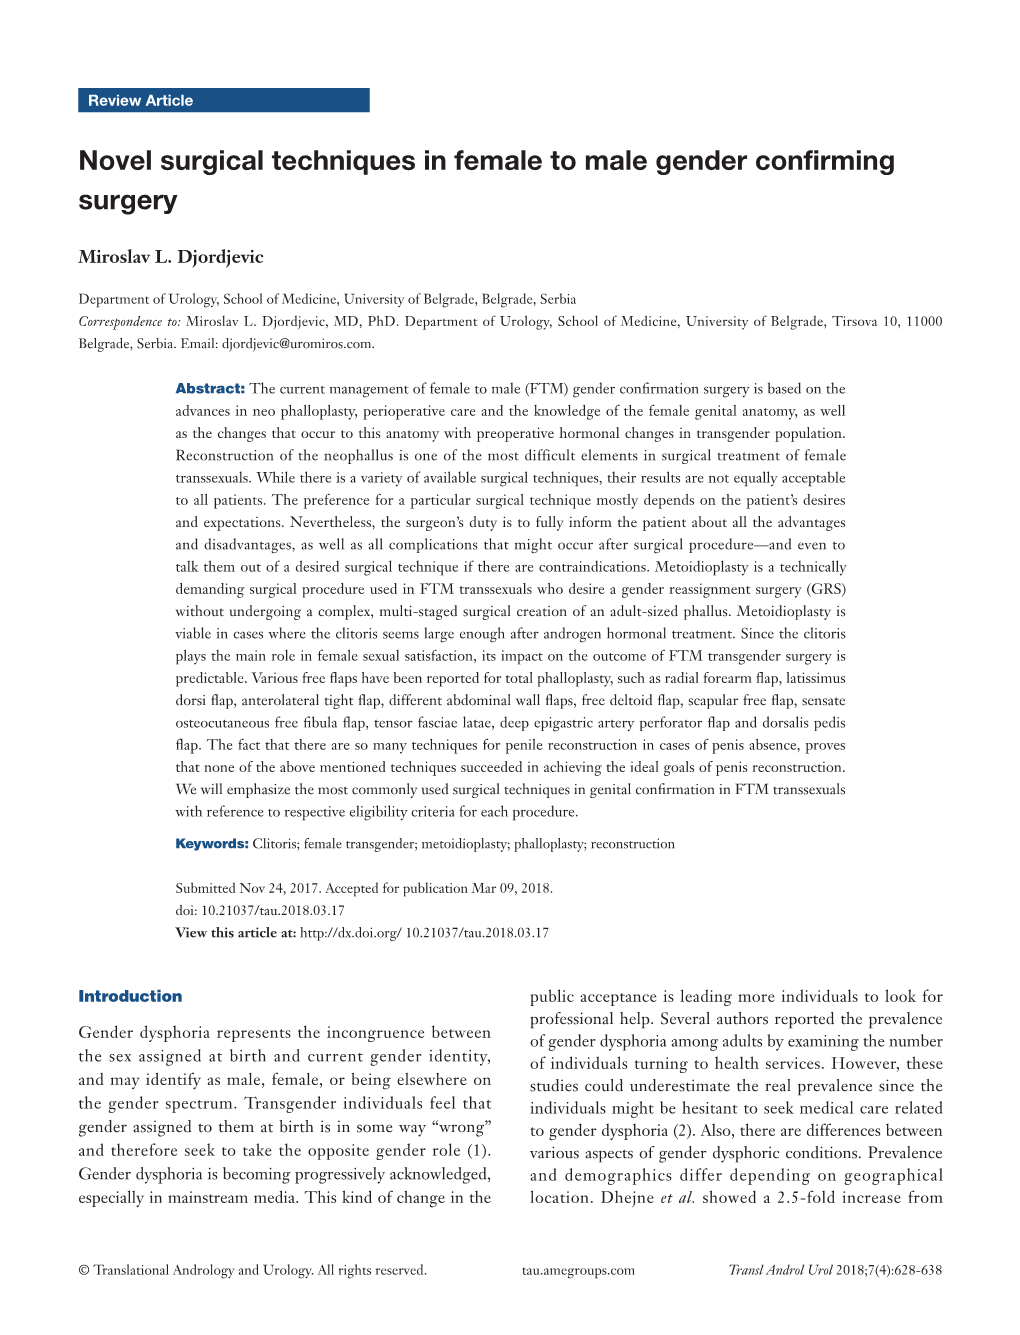 Novel Surgical Techniques in Female to Male Gender Confirming Surgery